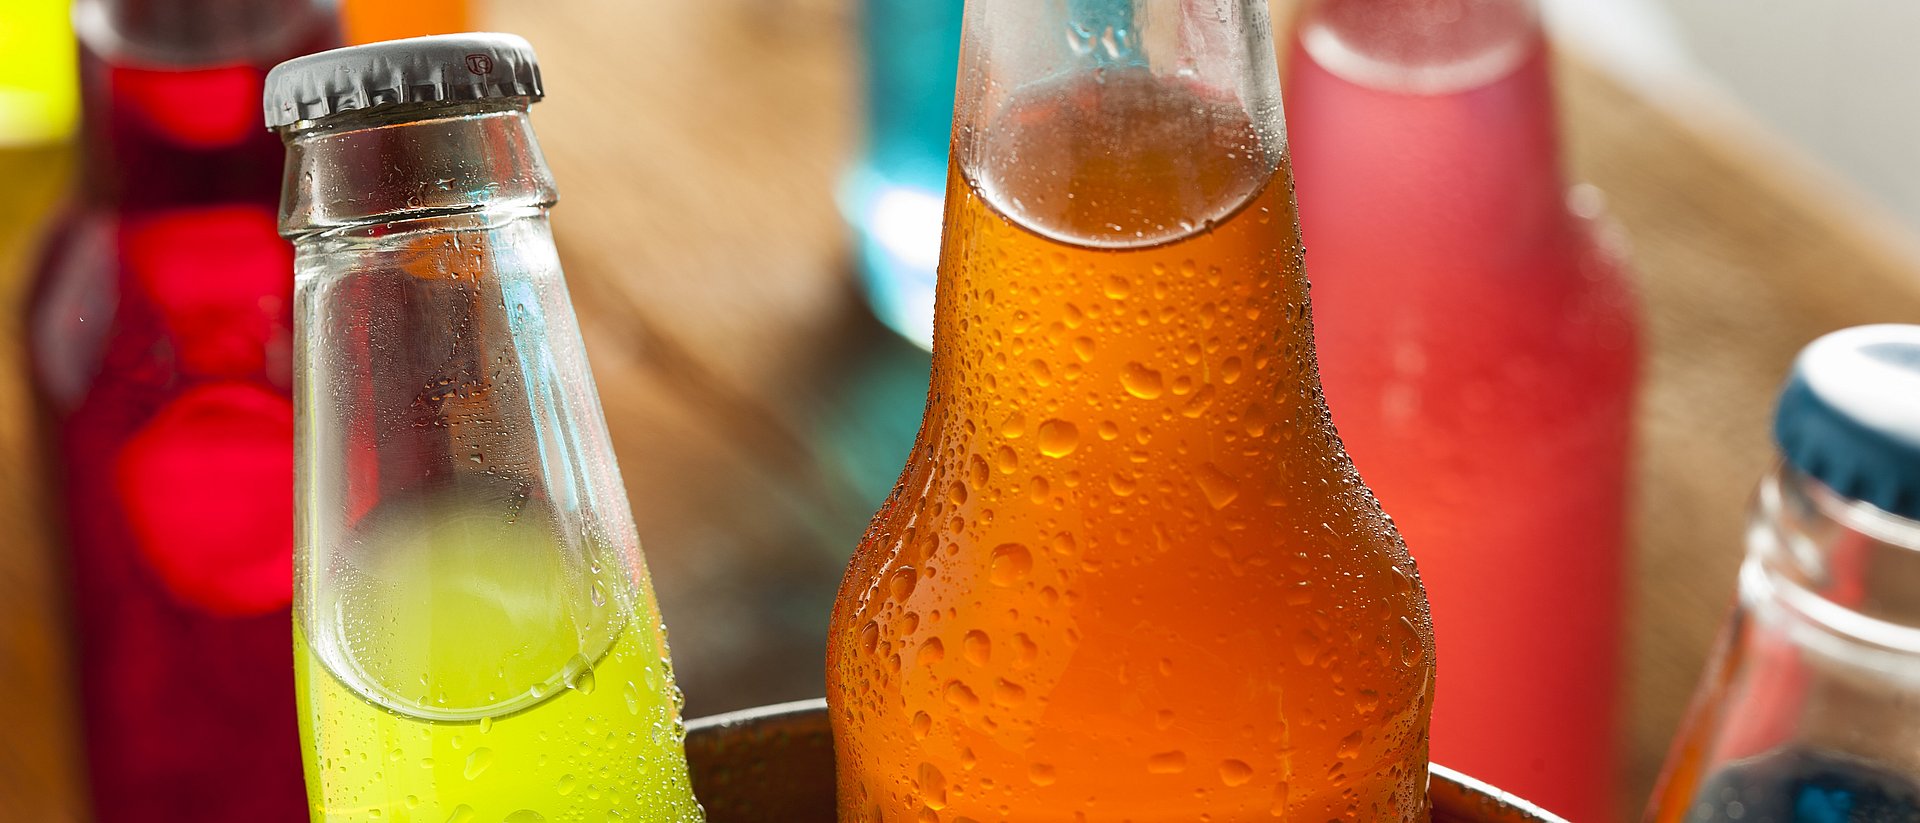 Bottles filled with colorful soft drinks.